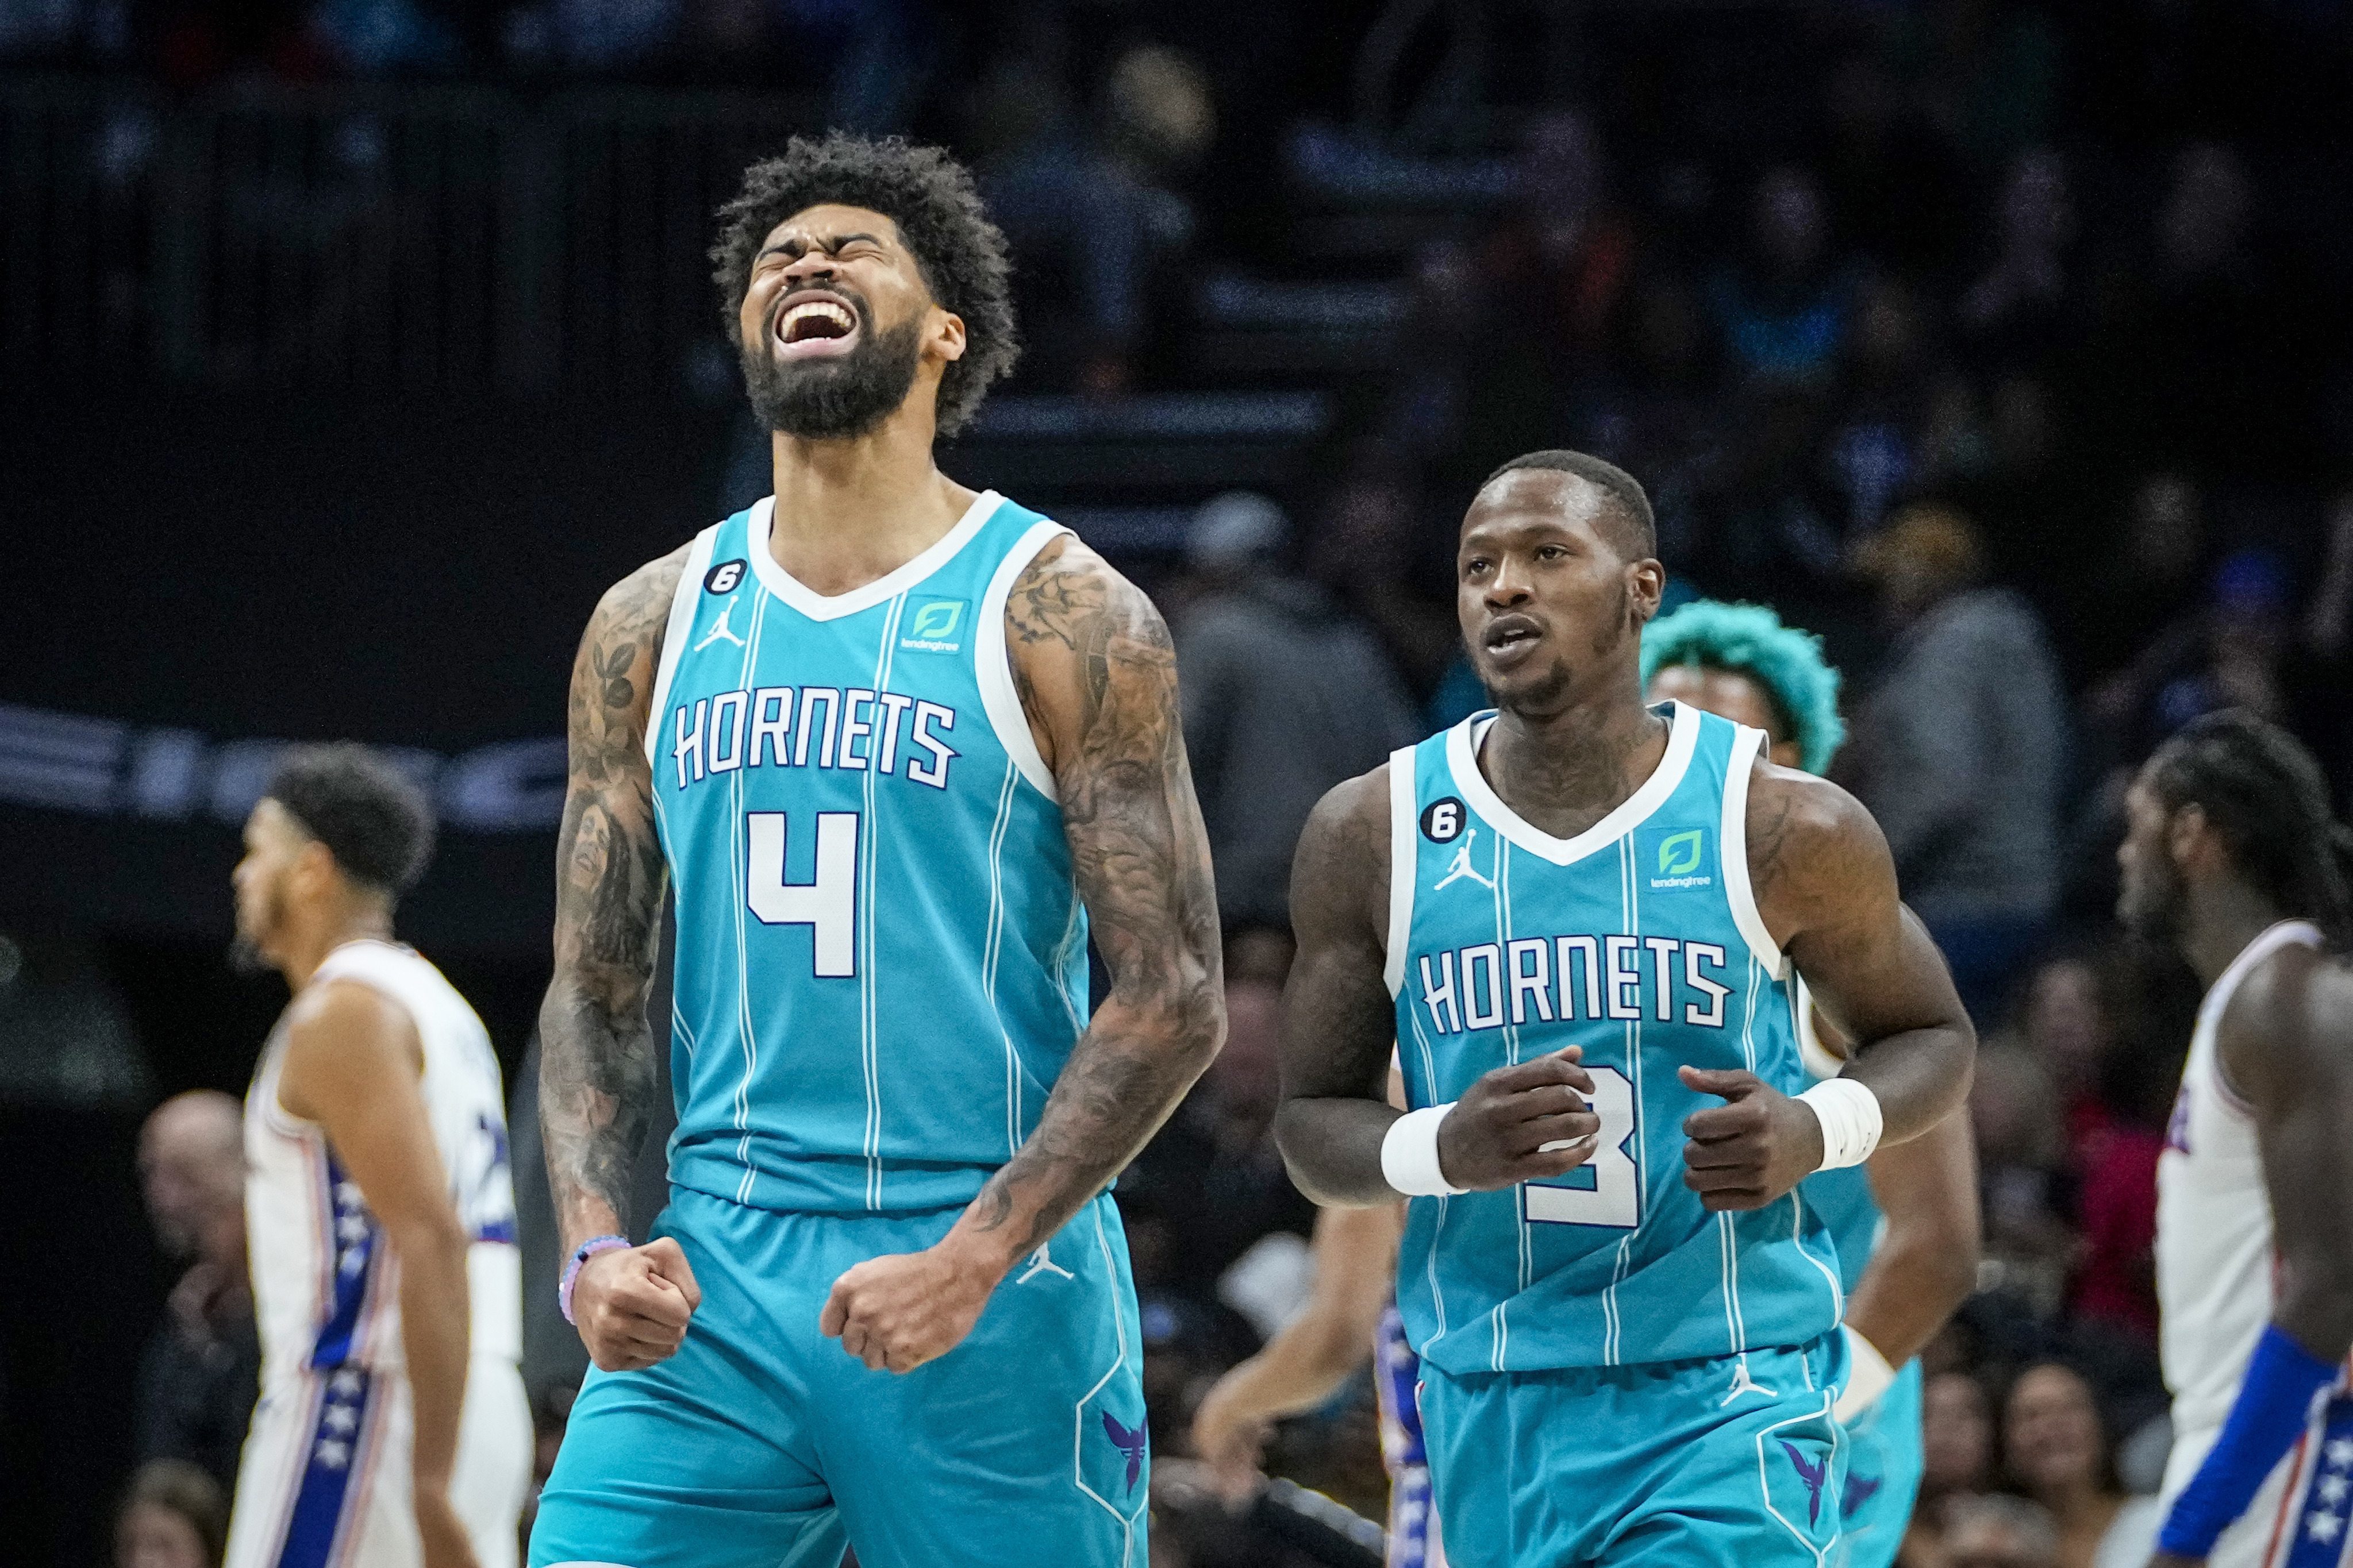 charlotte hornets players